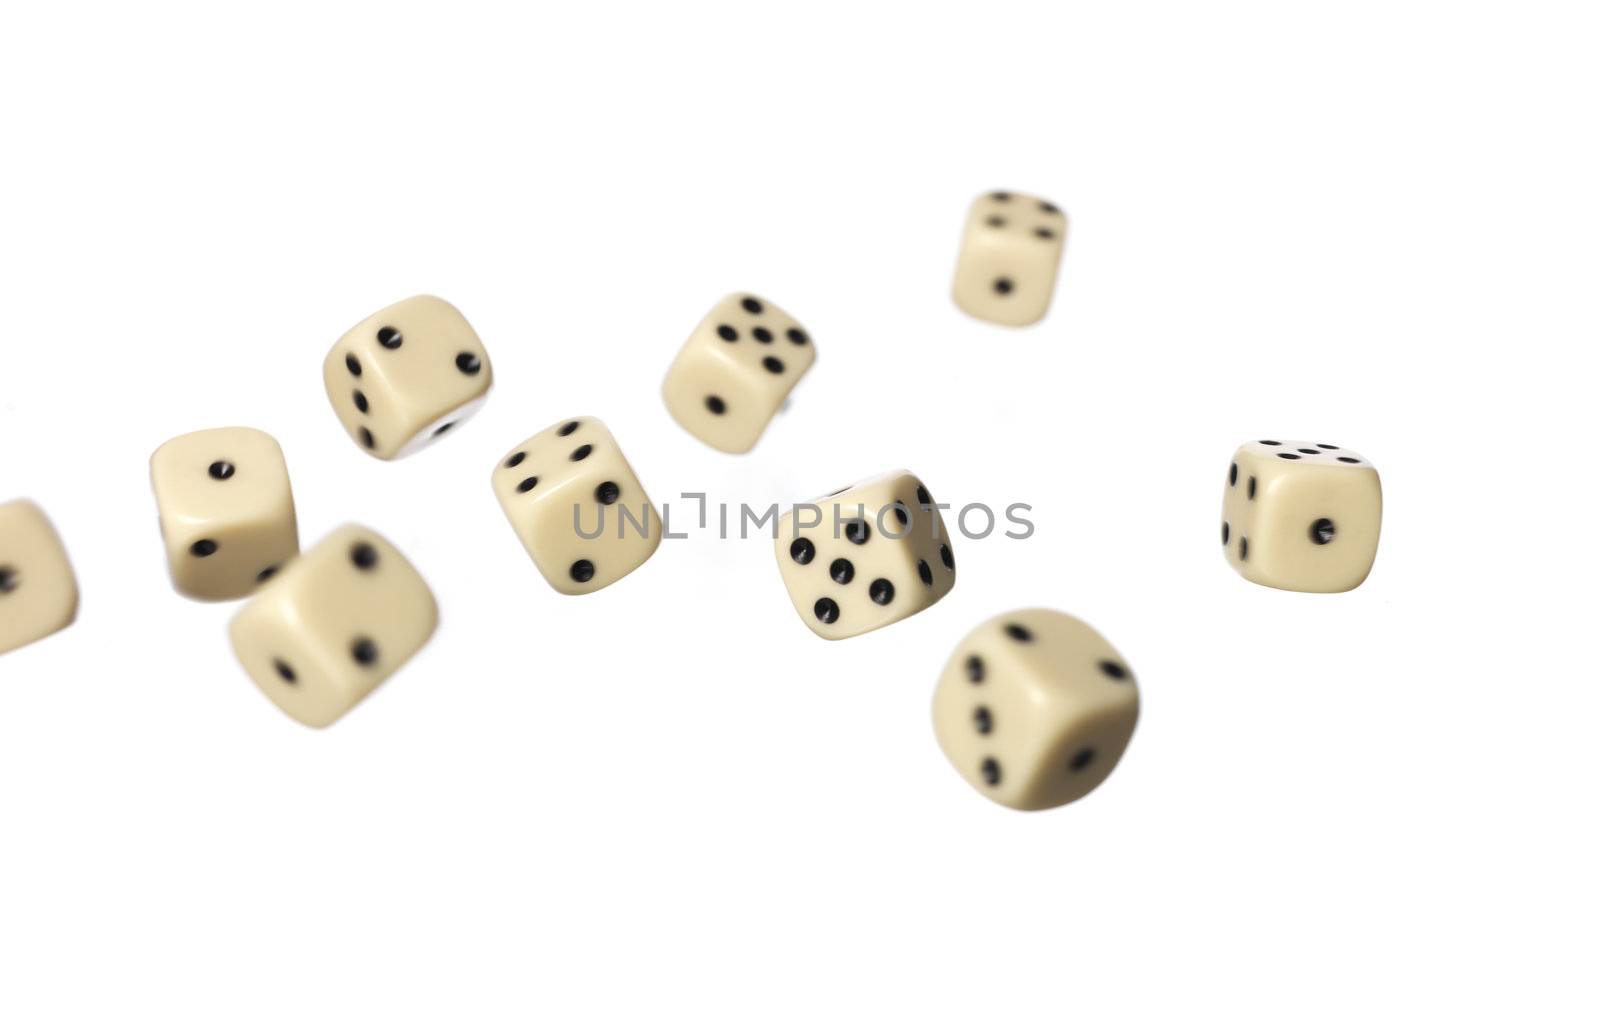 Roled dices by gemenacom